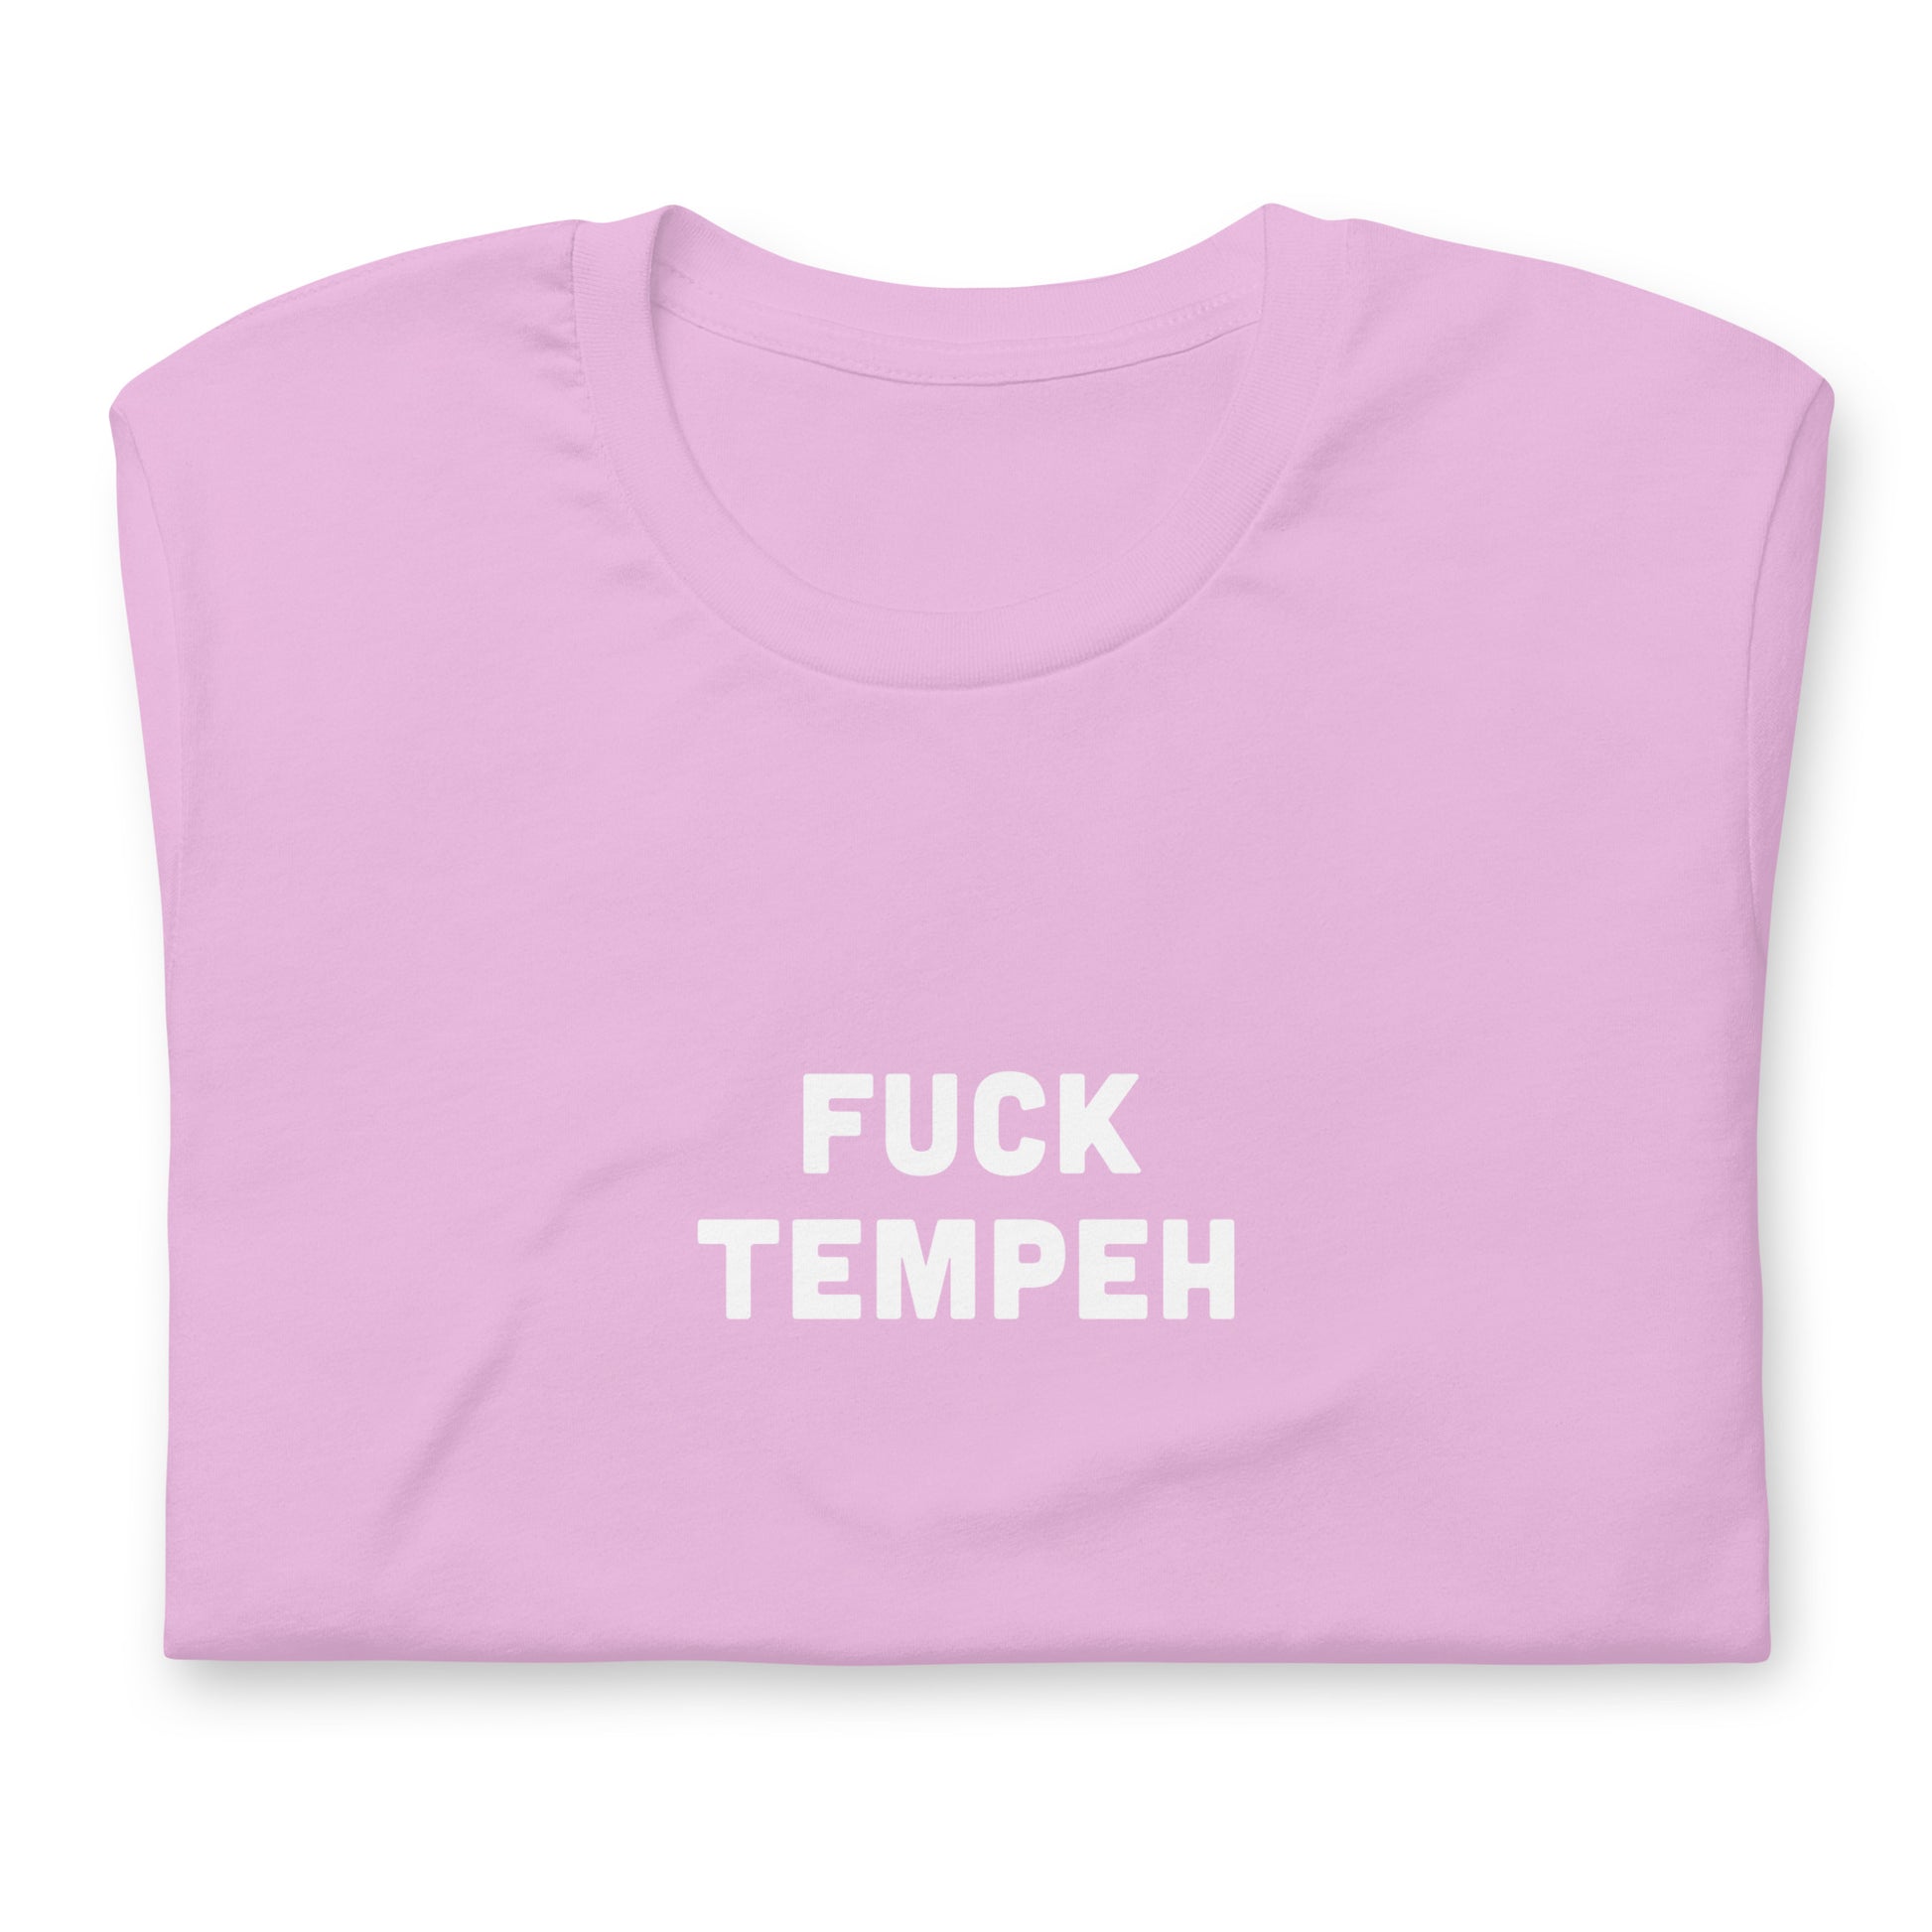 Fuck Tempeh T-Shirt Size 2XL Color Forest